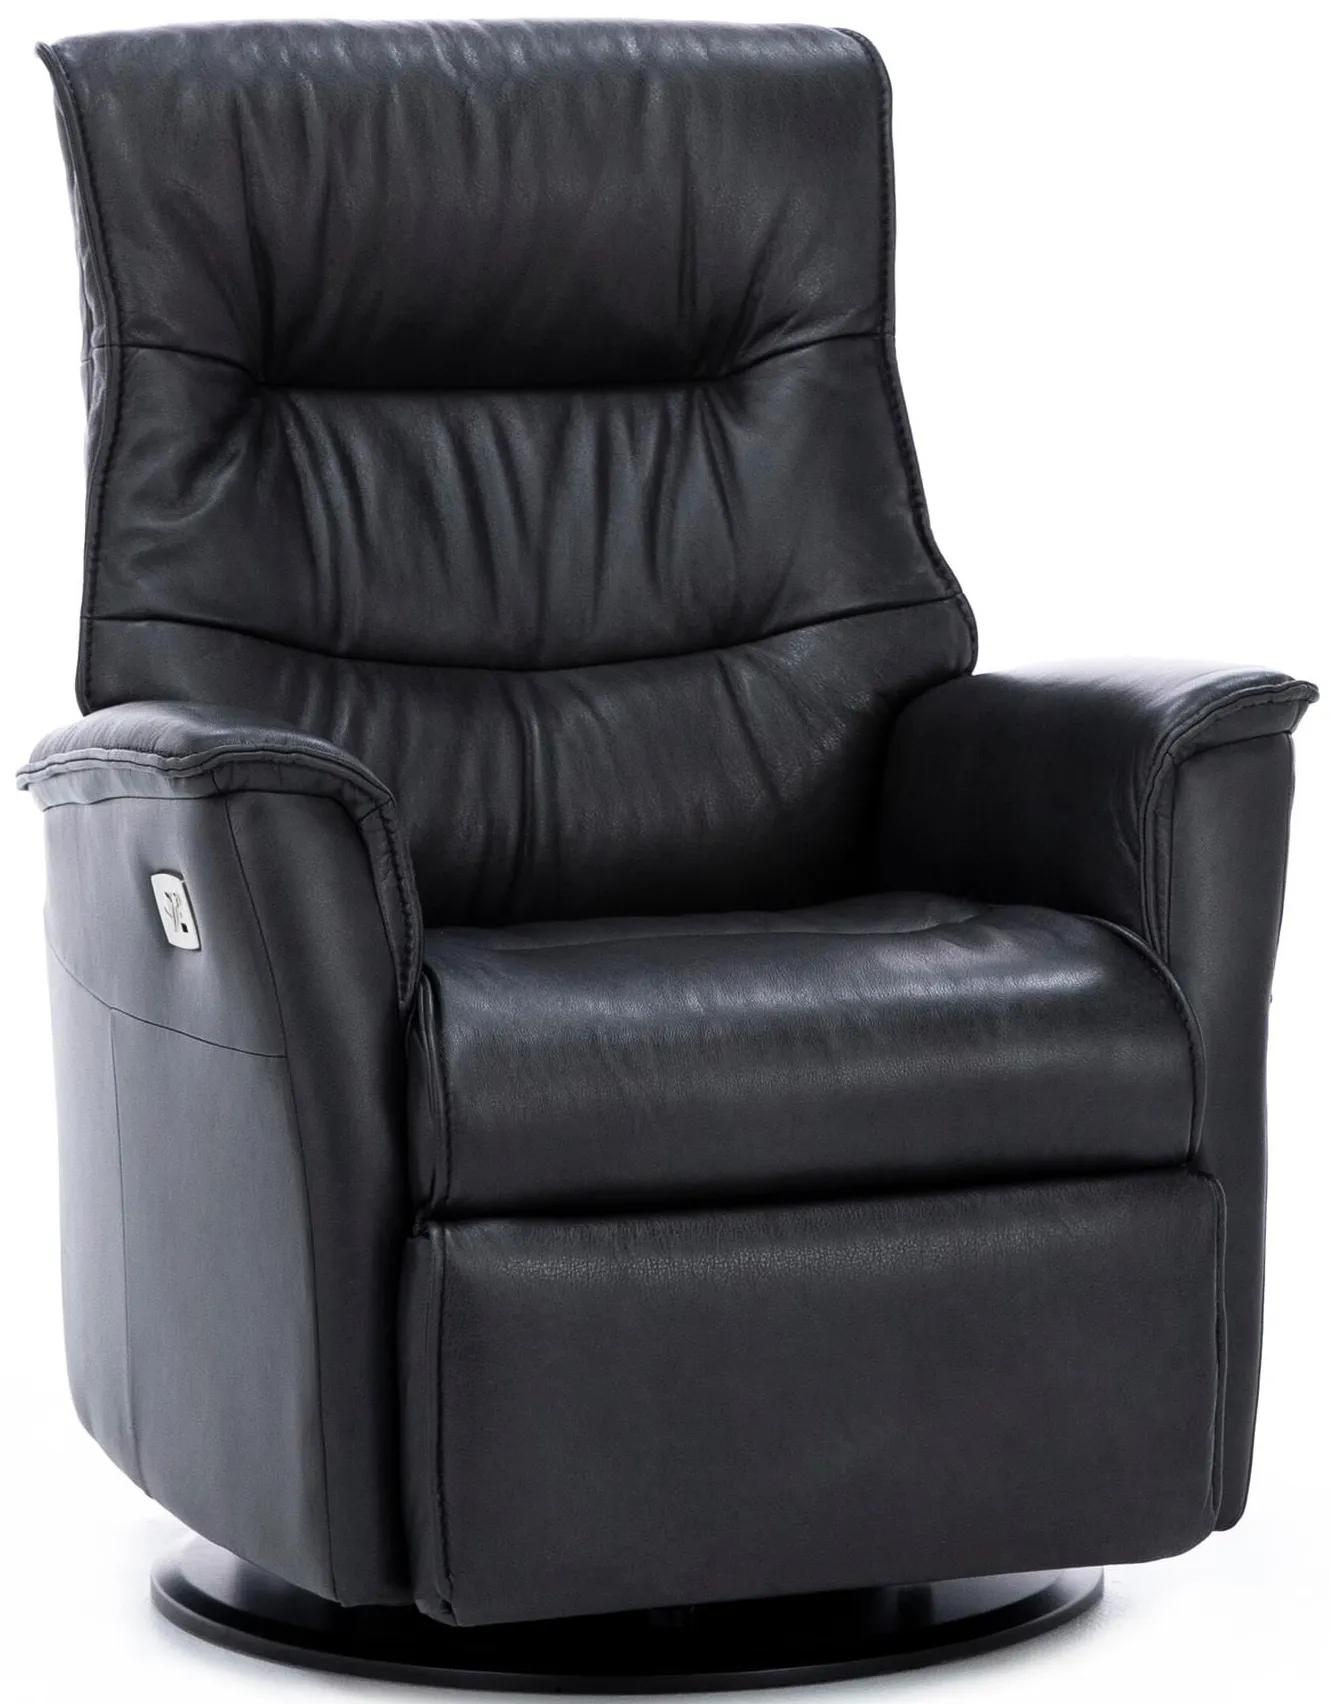 Direct Designs® Chelsie Leather Medium Power Recliner in Charcoal